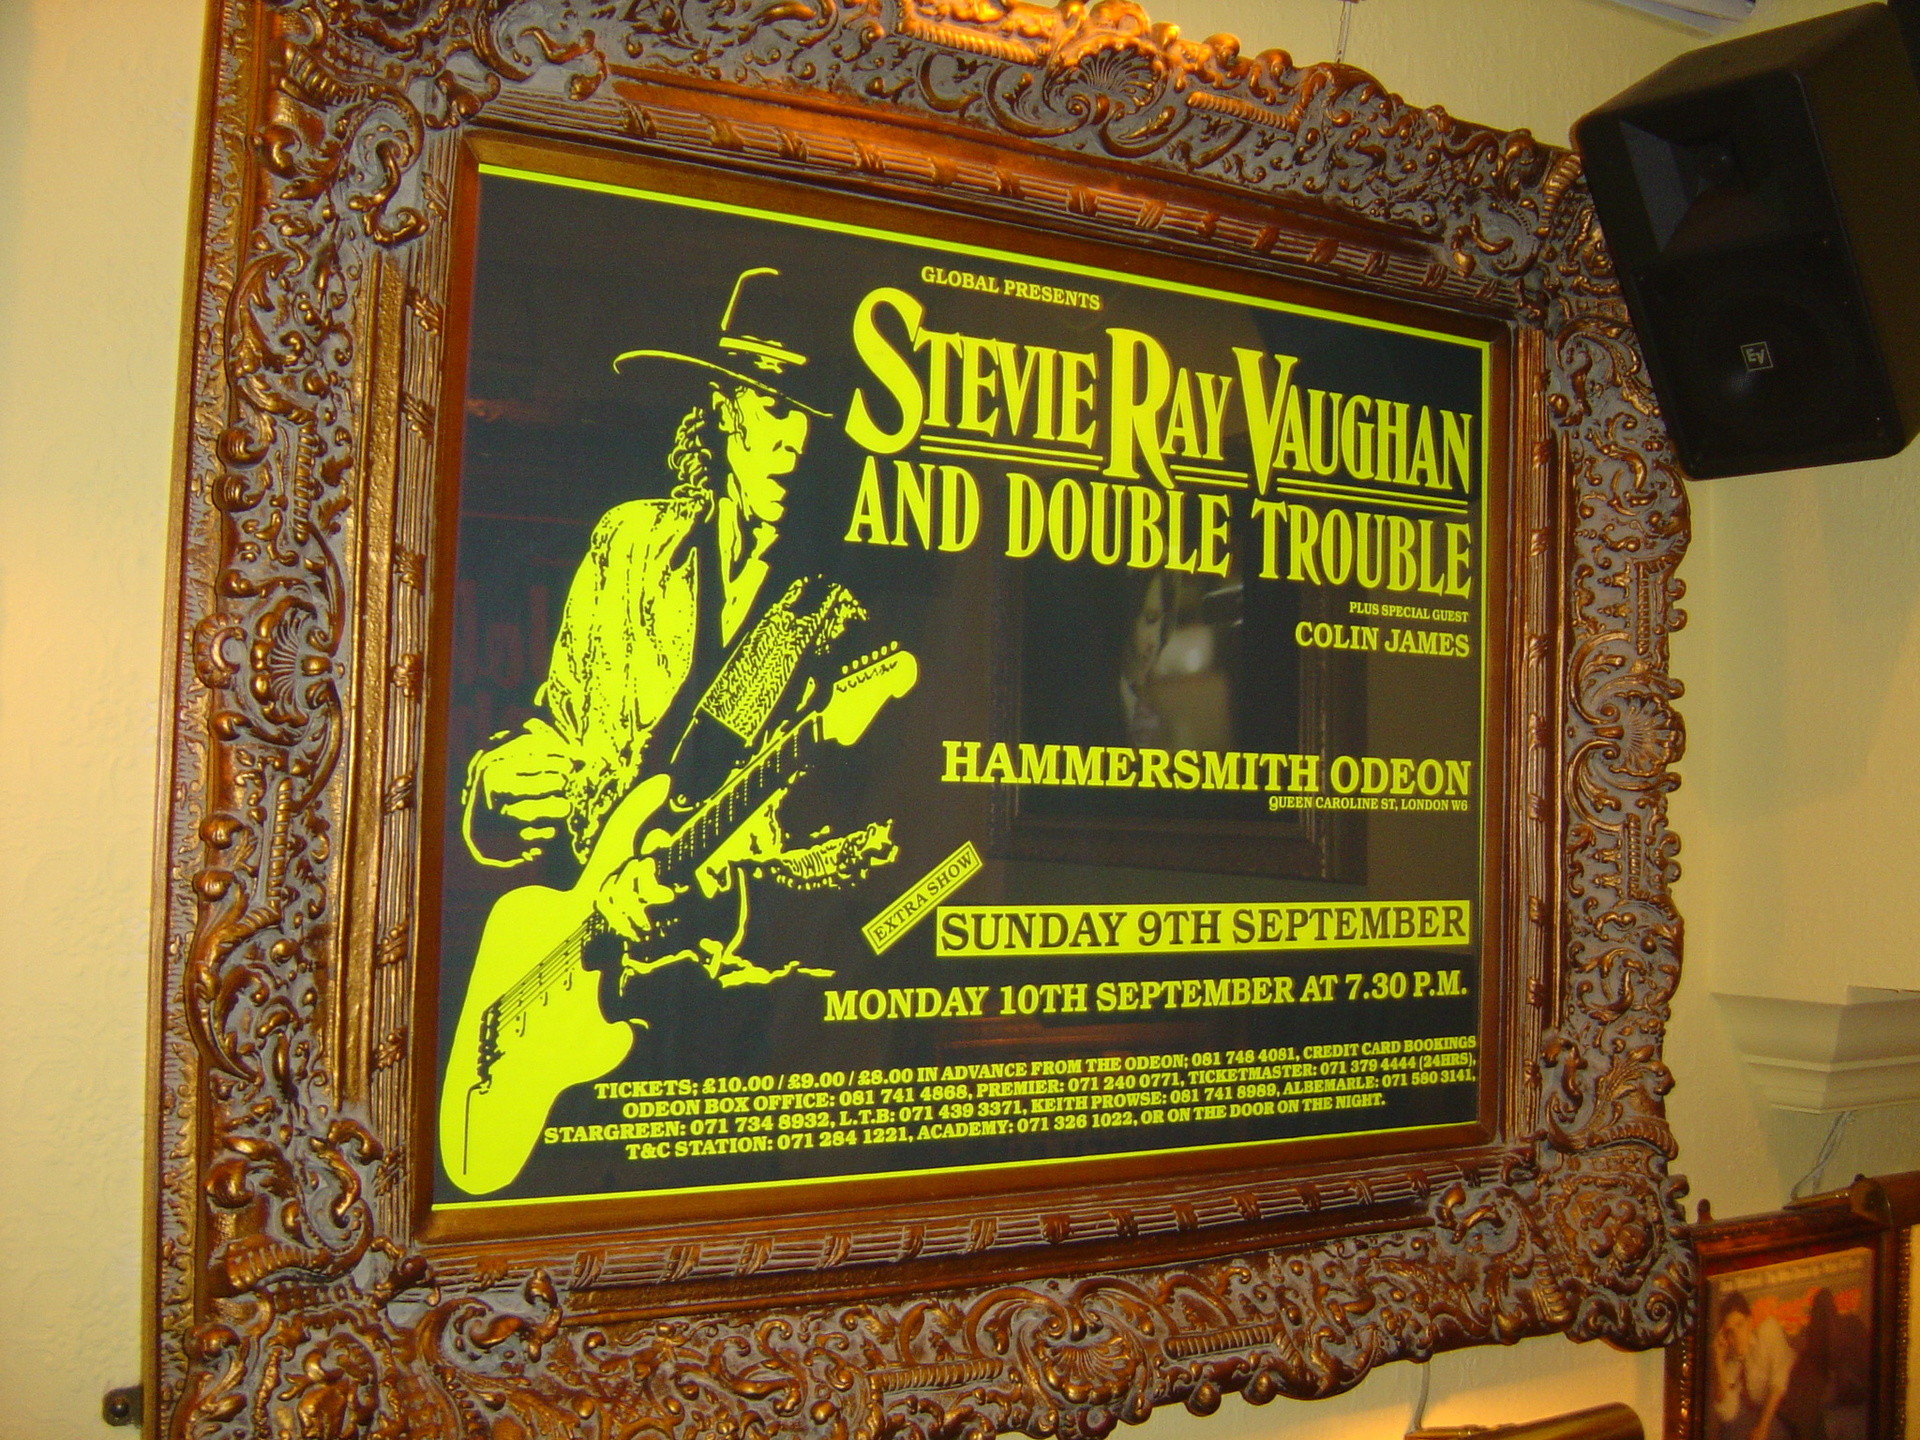 1920x1440 Stevie Ray Vaughan images Hard Rock Cafe Copenhagen HD wallpaper and  background photos